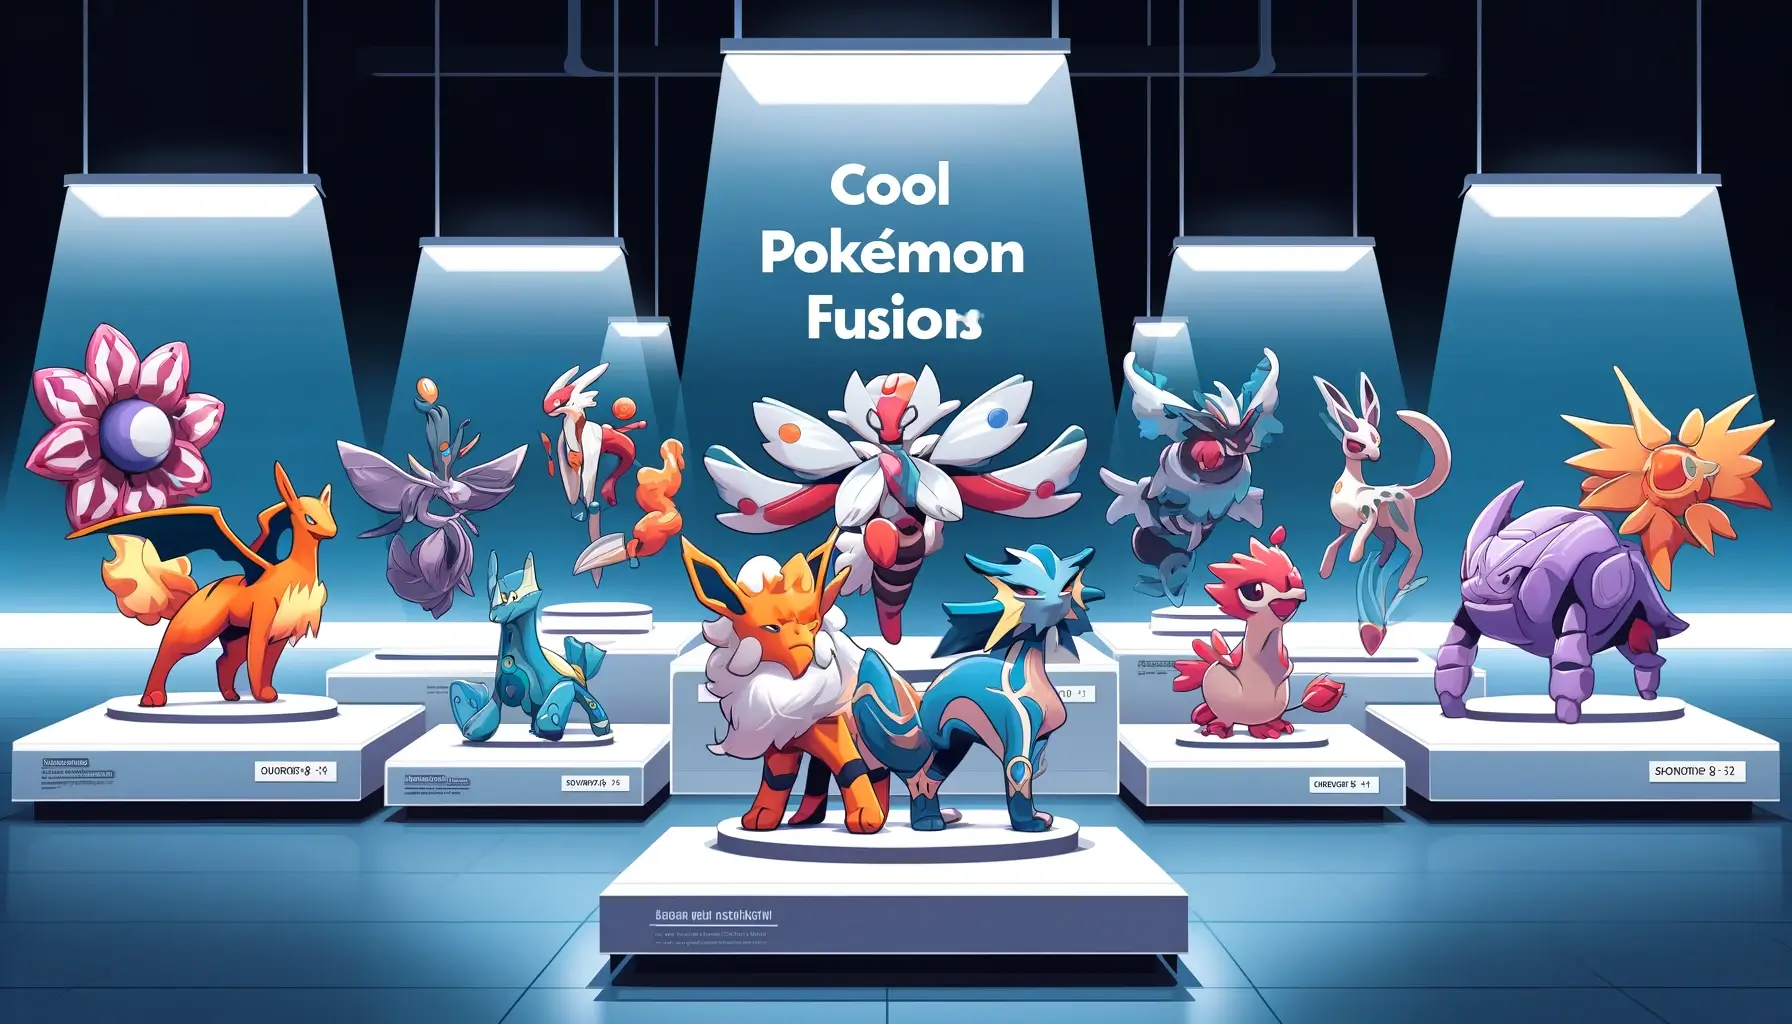 Cool Pokemon Fusions'. The image features a showcase of several creatively fused Pokémon, each a unique